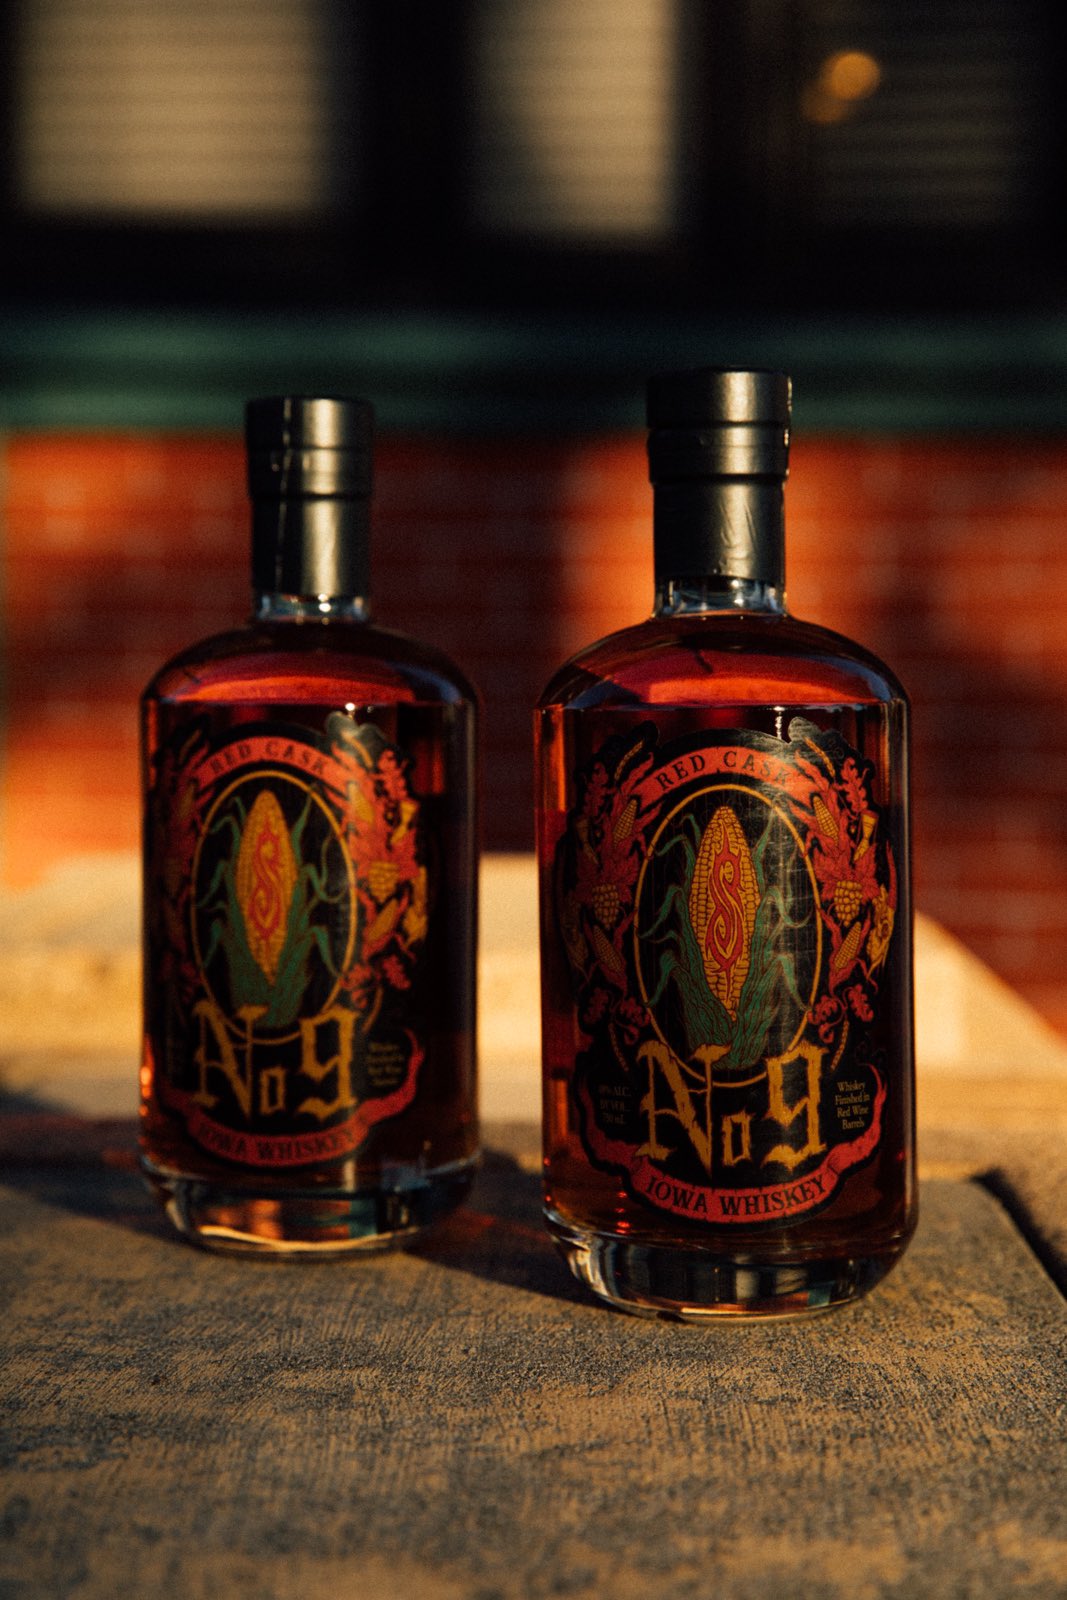 Slipknot Releases Its New No. 9 Iowa “Red Cask” Whiskey